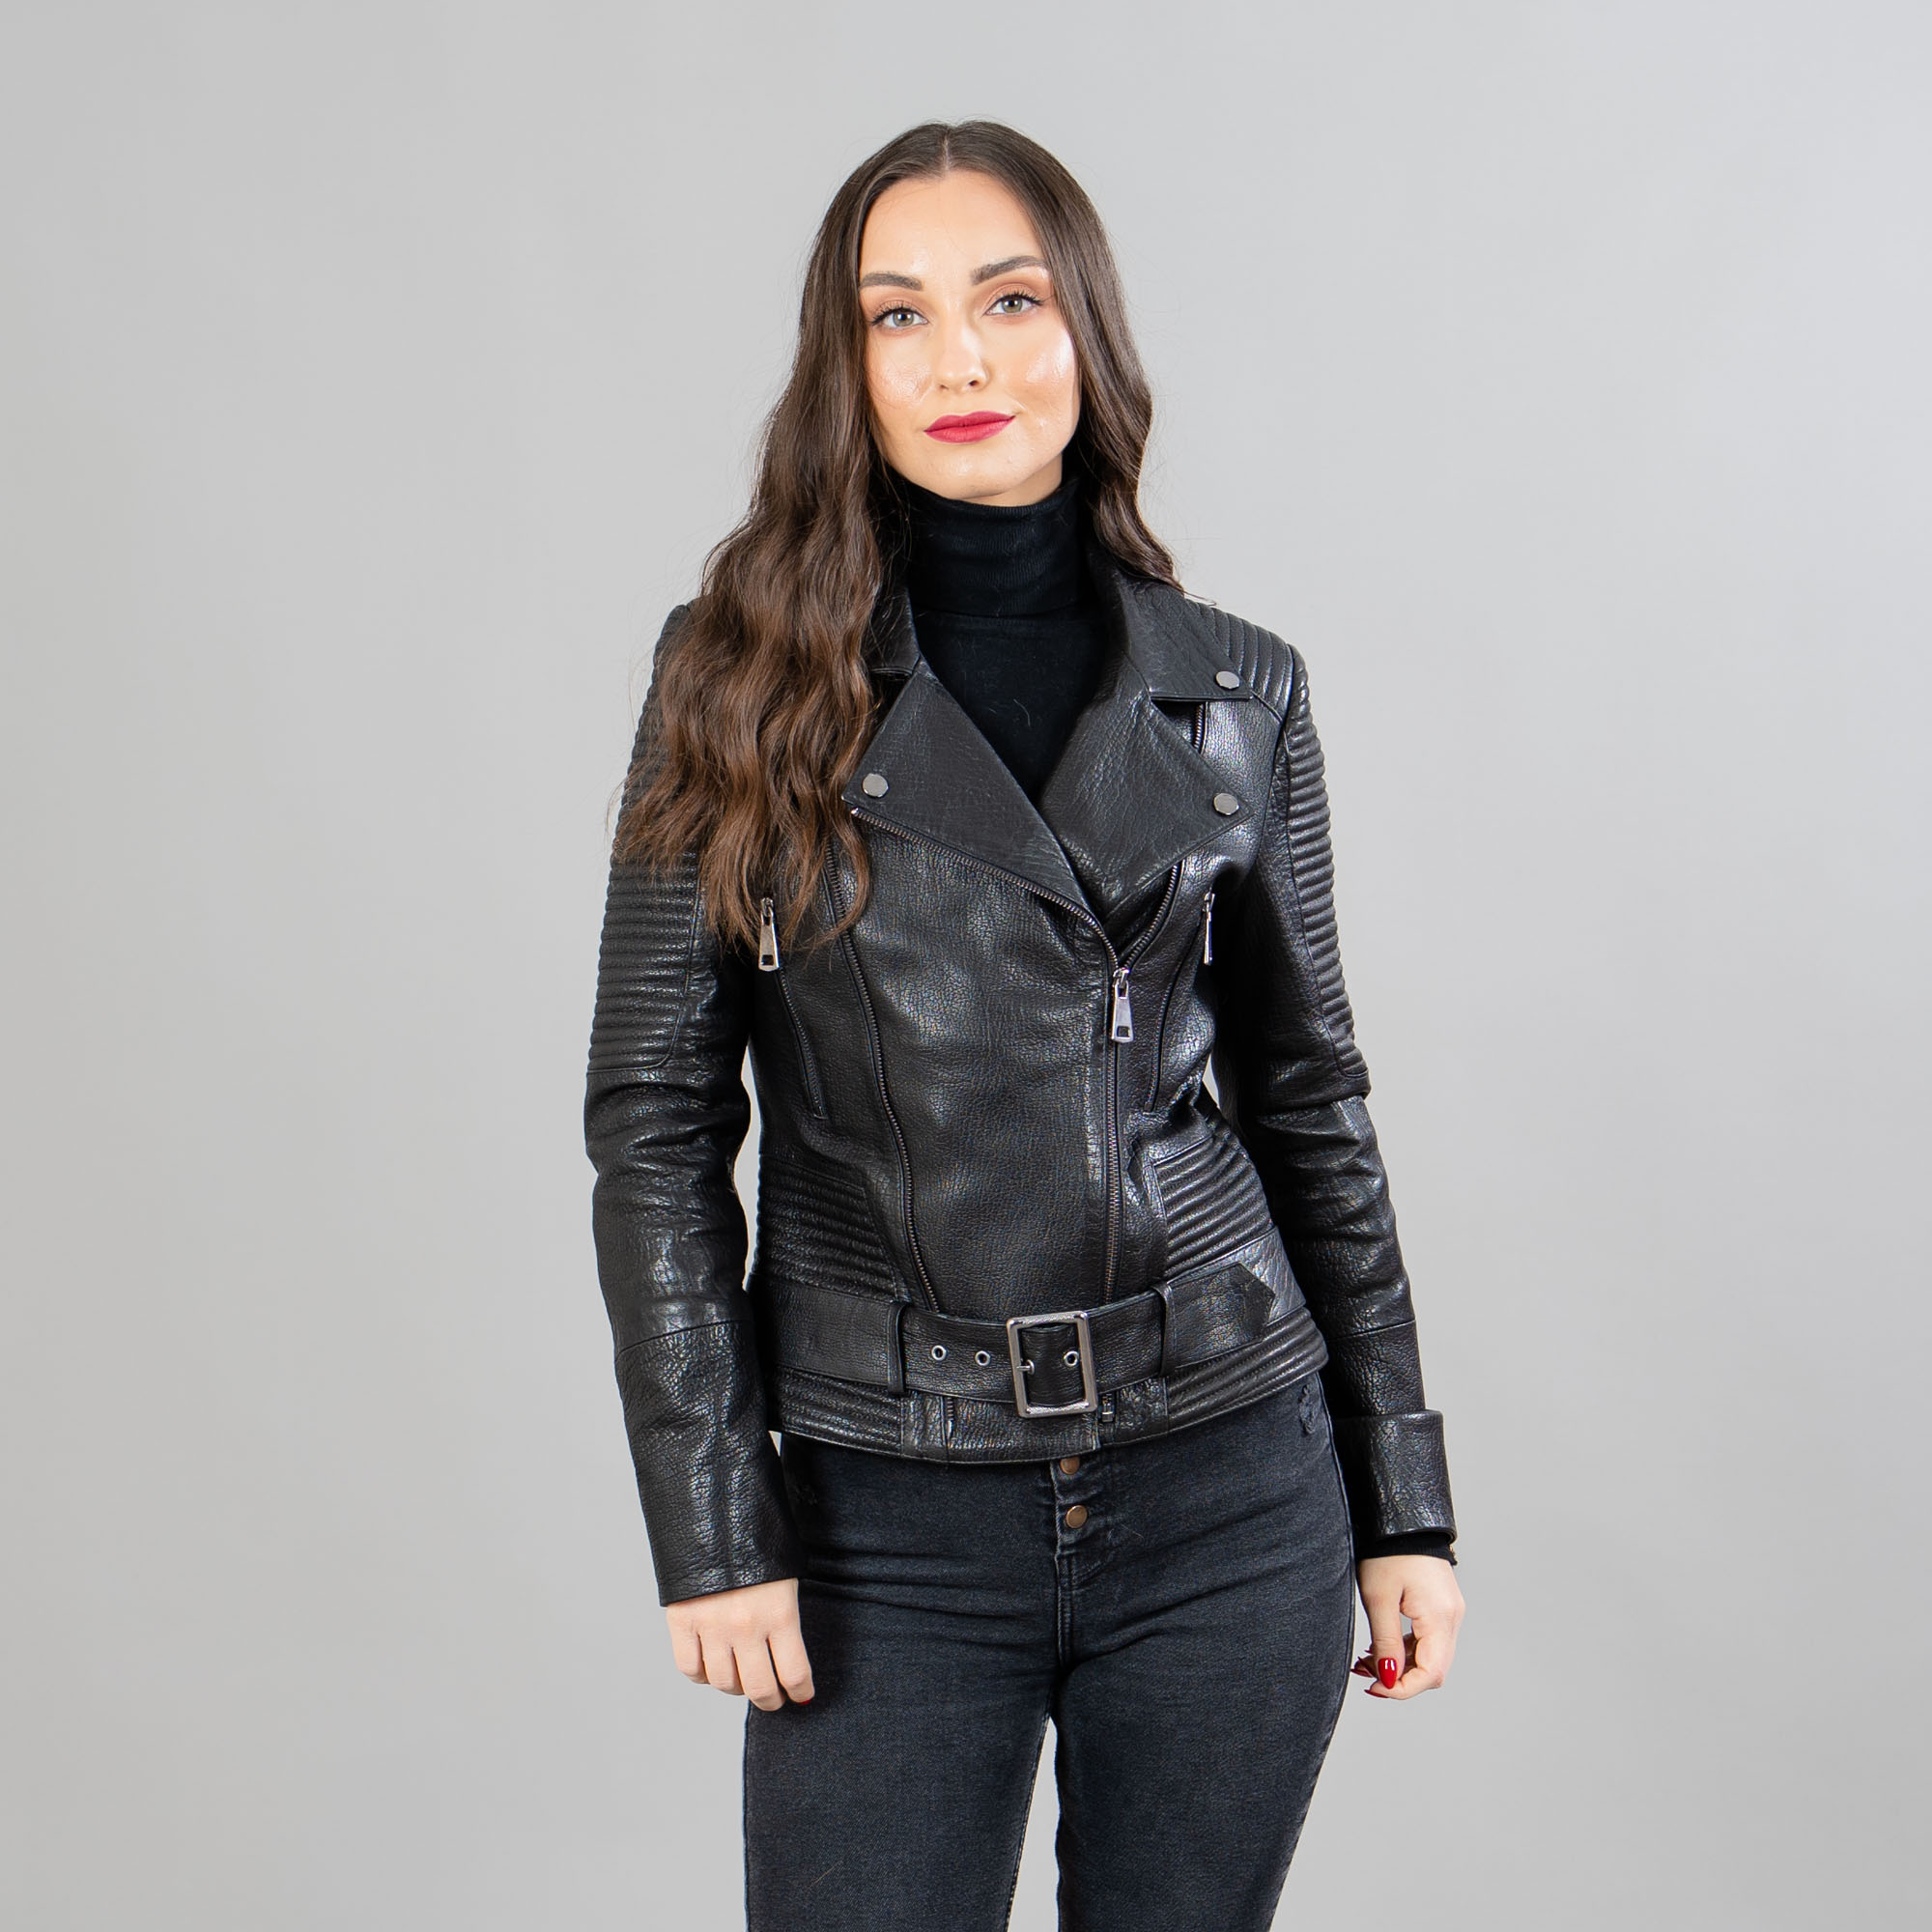 Leather jacket with a belt in black color